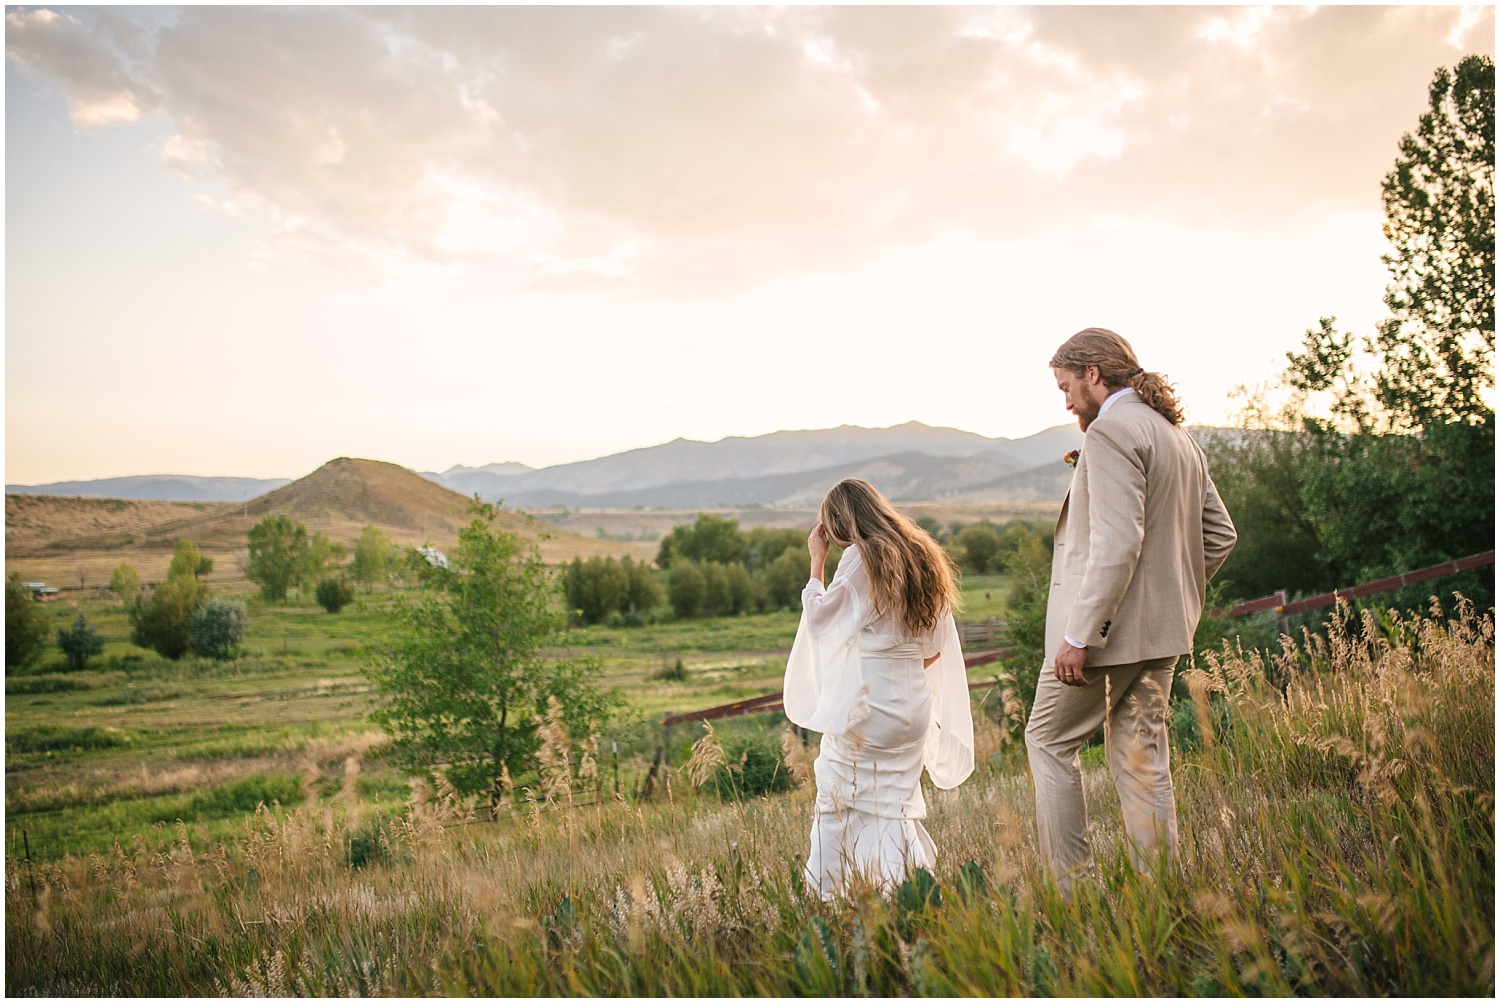 Bride and groom at sunset at Lone Hawk Farm wedding in Longmont Colorado